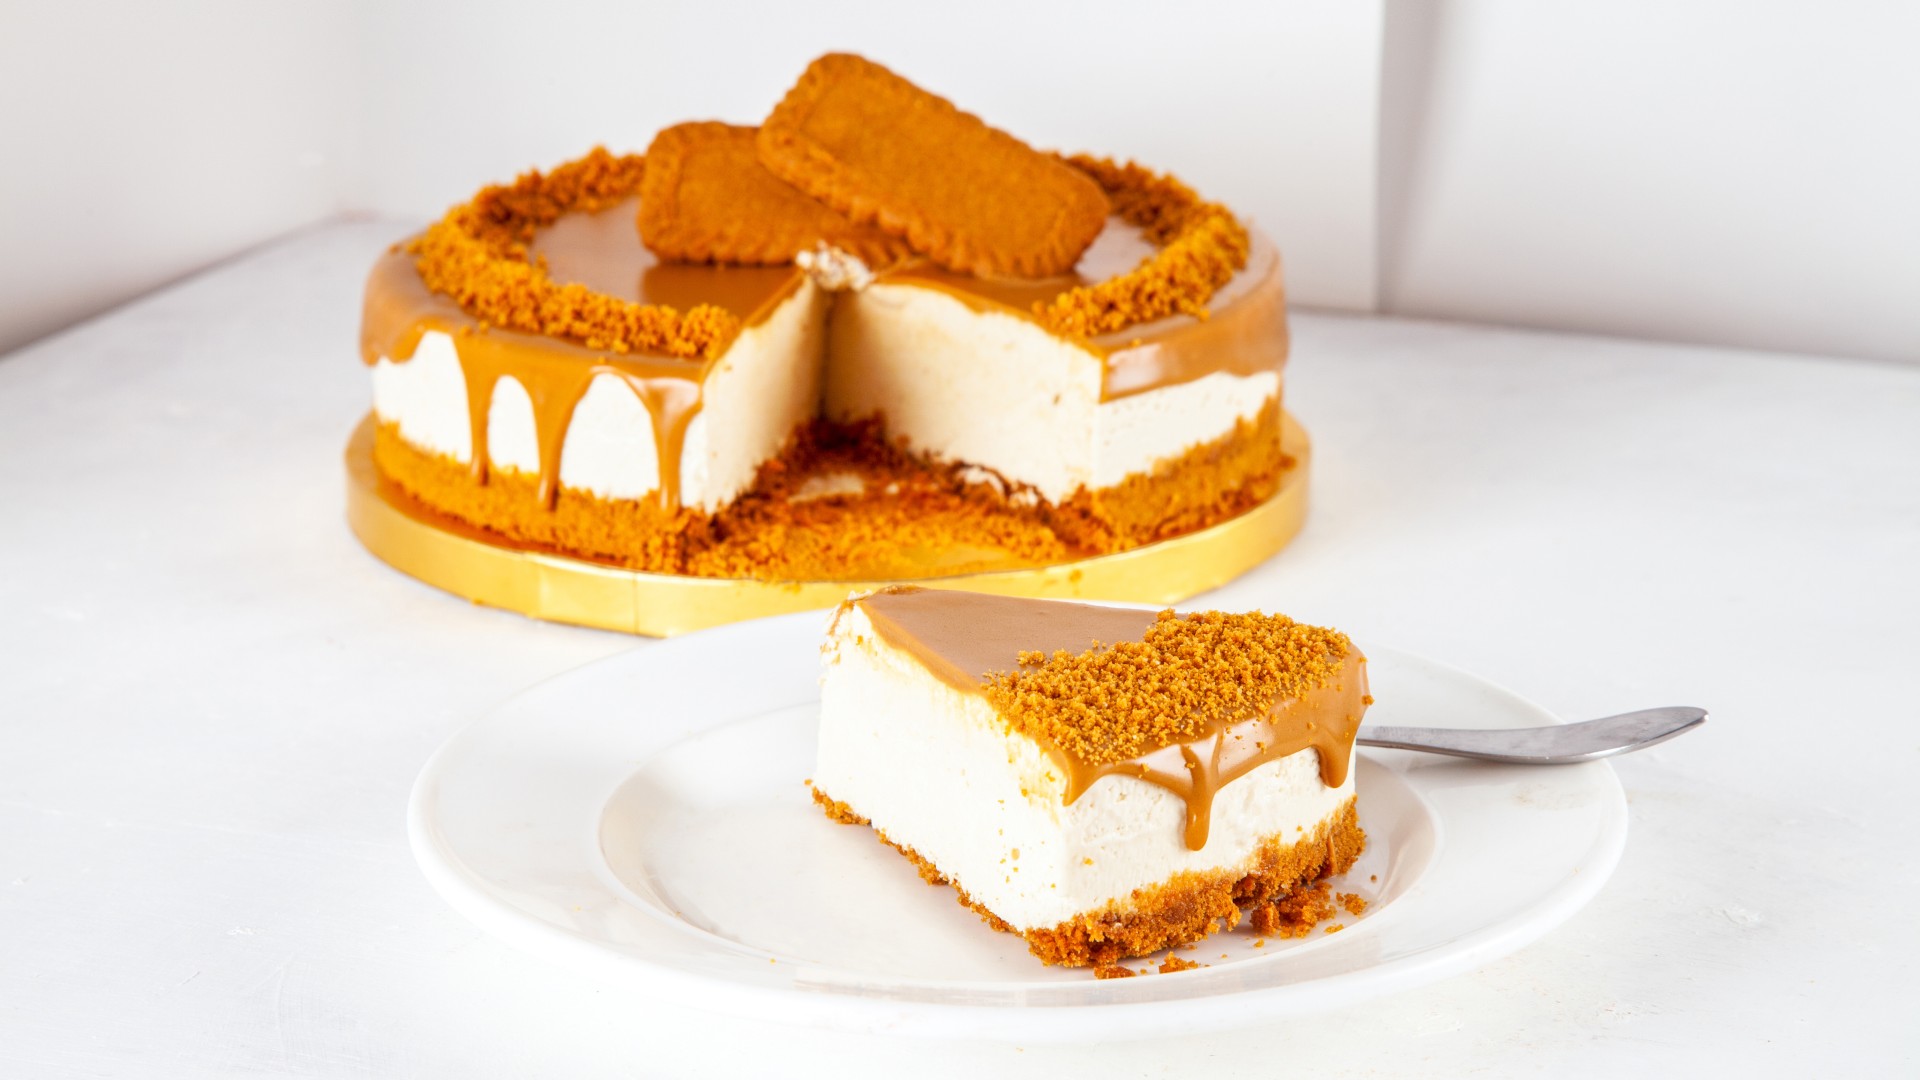 Lotus Biscoff cheesecake and biscuits